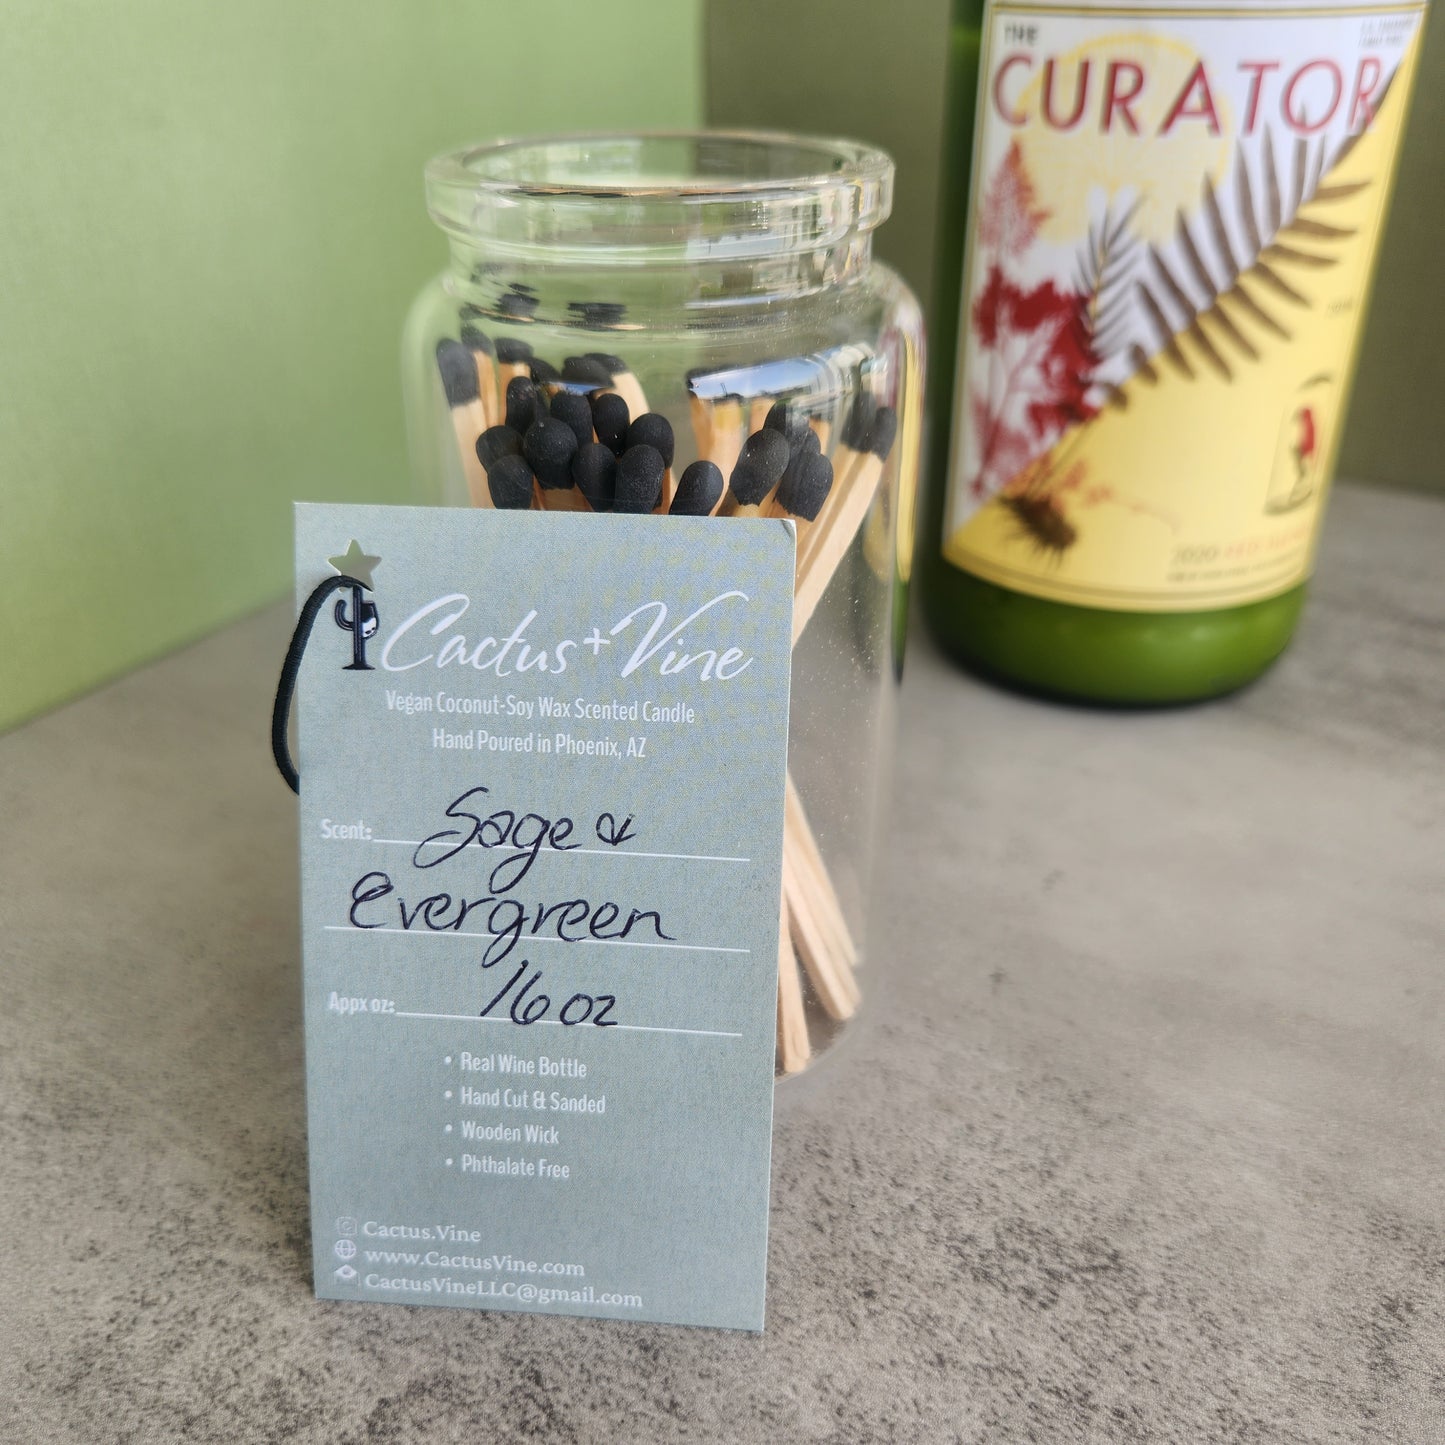 "Sage & Evergreen" Scented Candle in an Up-Cycled "Curator" Wine Bottle